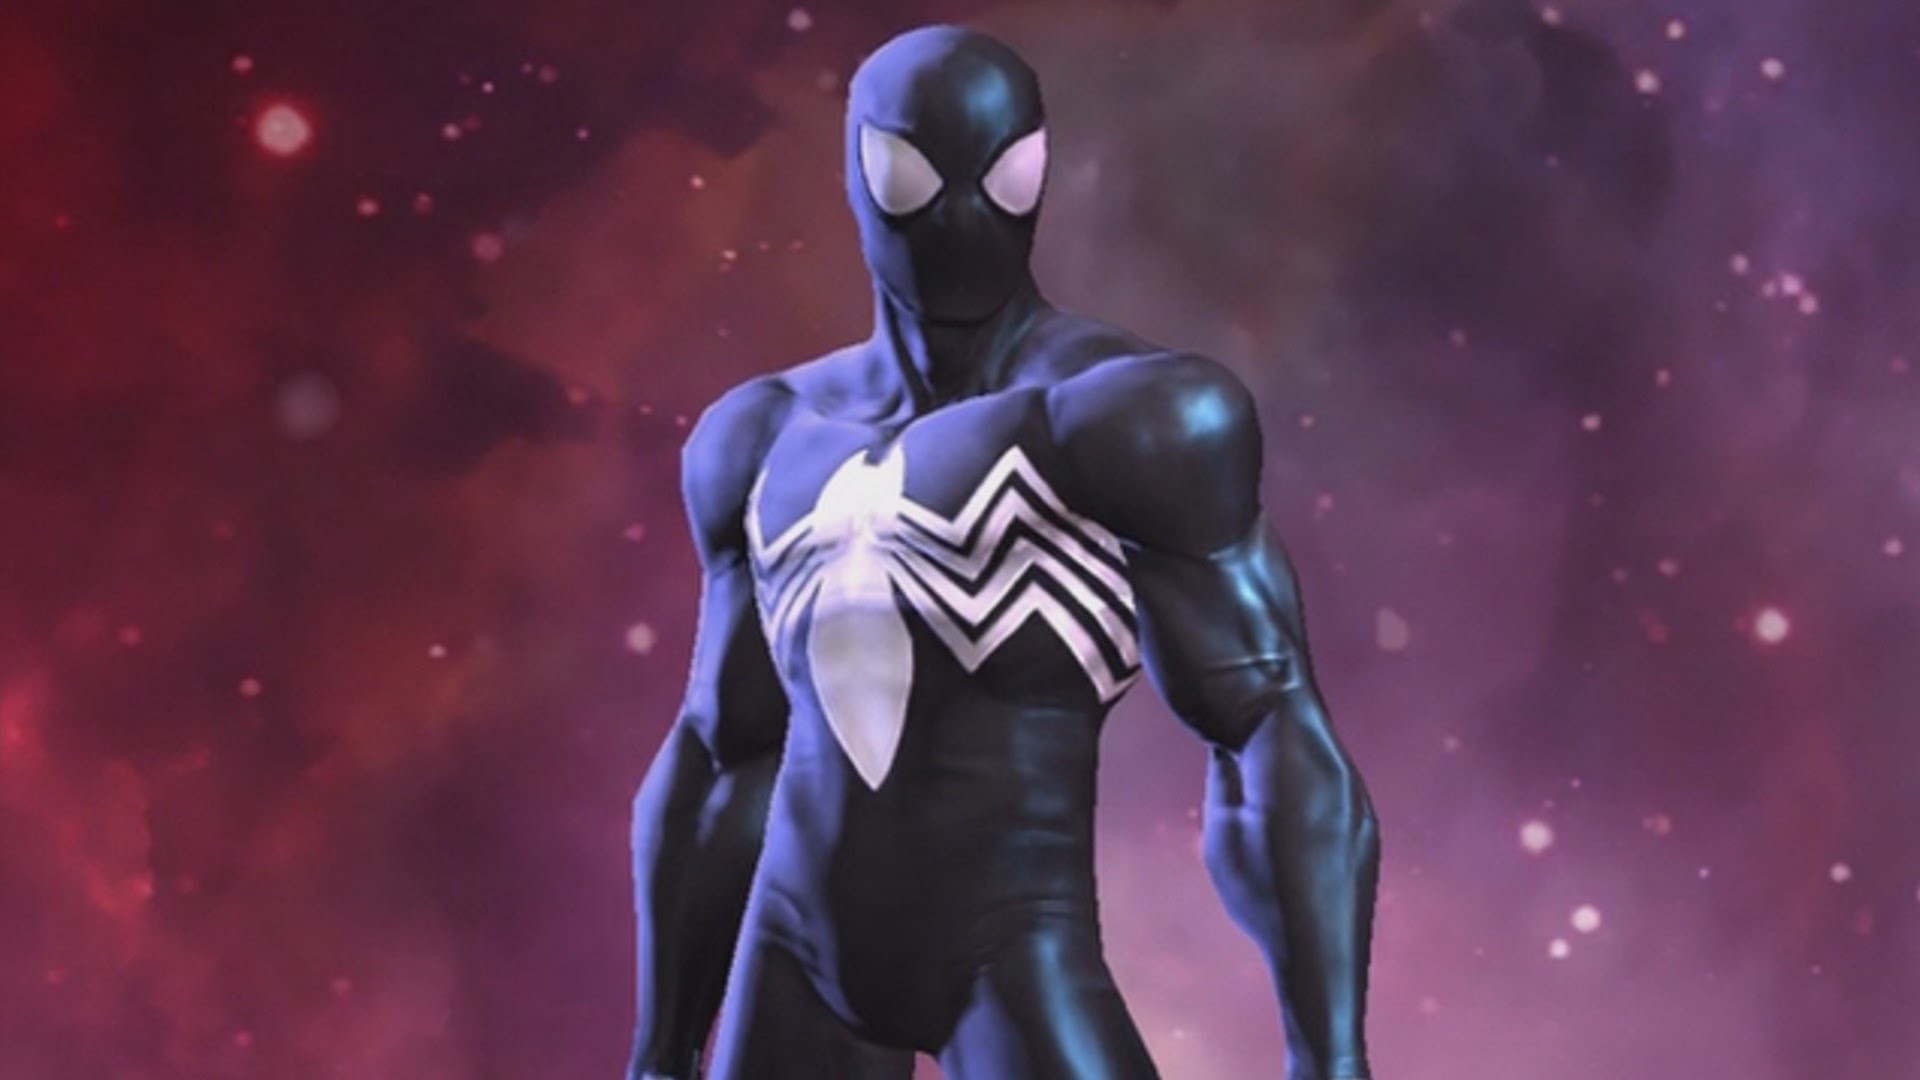 1920x1080 MARVEL Contest of Champions iOSAndroid SYMBIOTIC / BLACK SUIT SPIDER-MAN  OVERVIEW